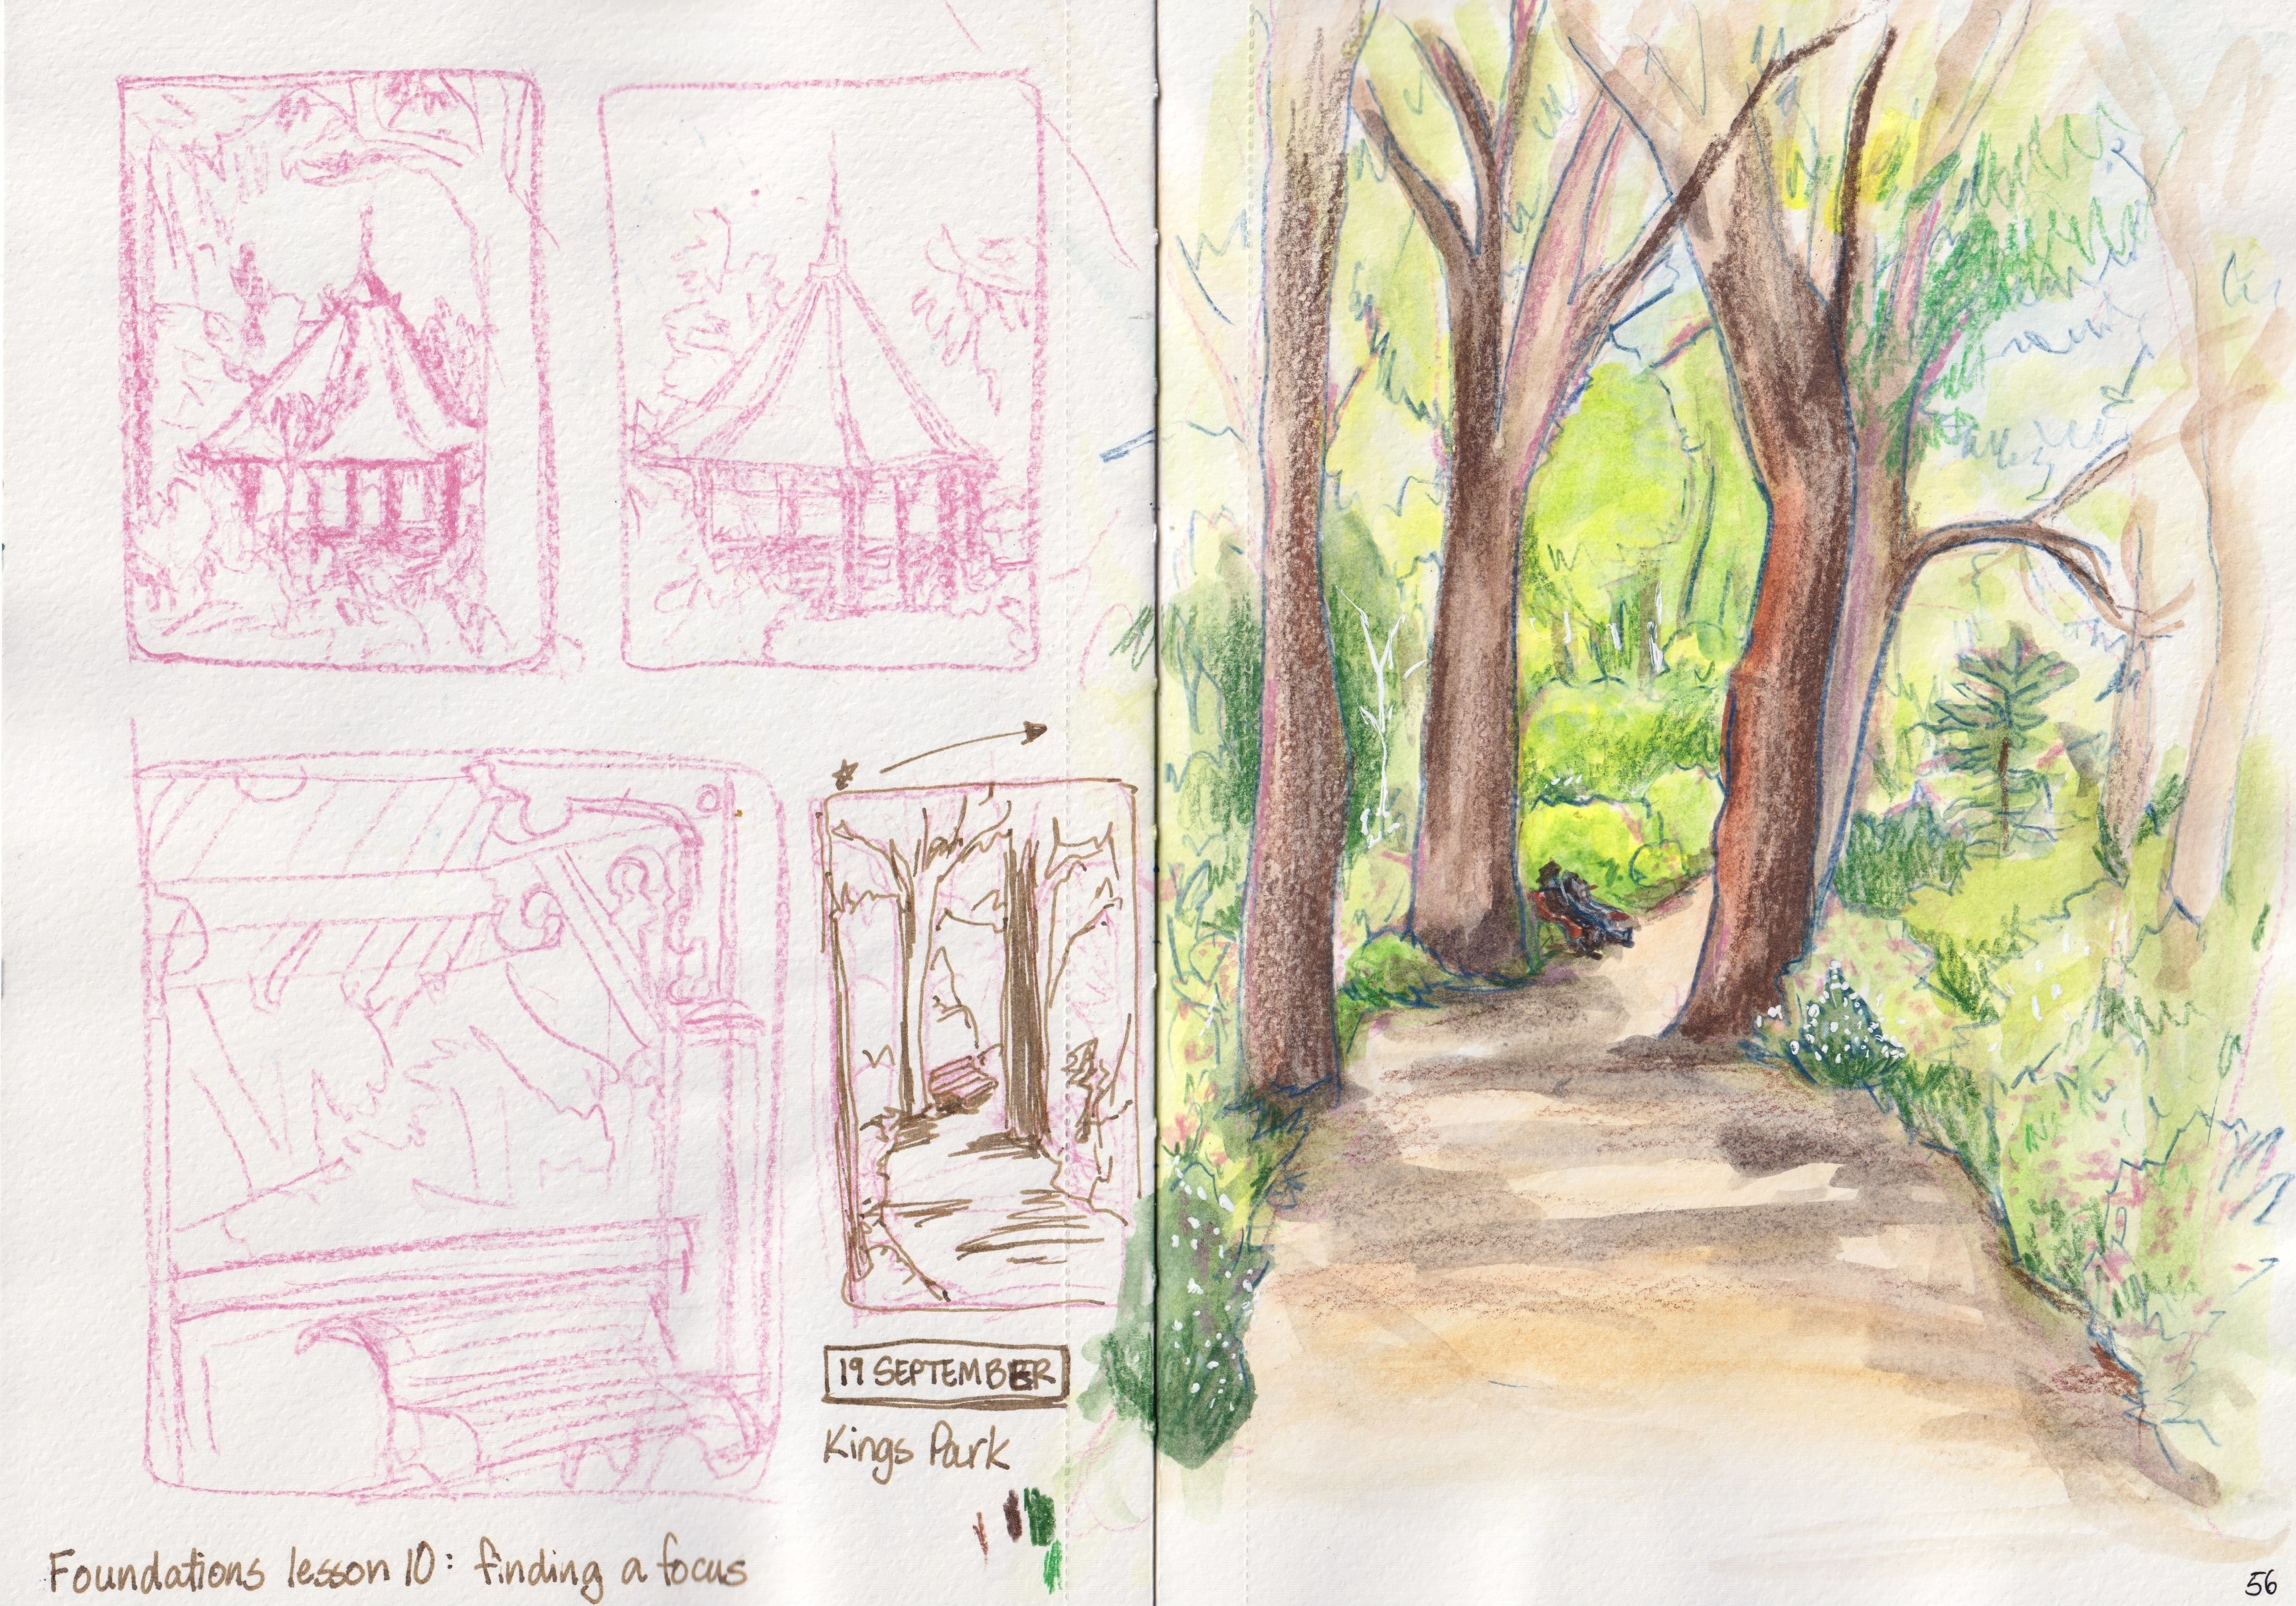 sketchbook3 7.jpeg|sketch of a forest path and some thumbnails